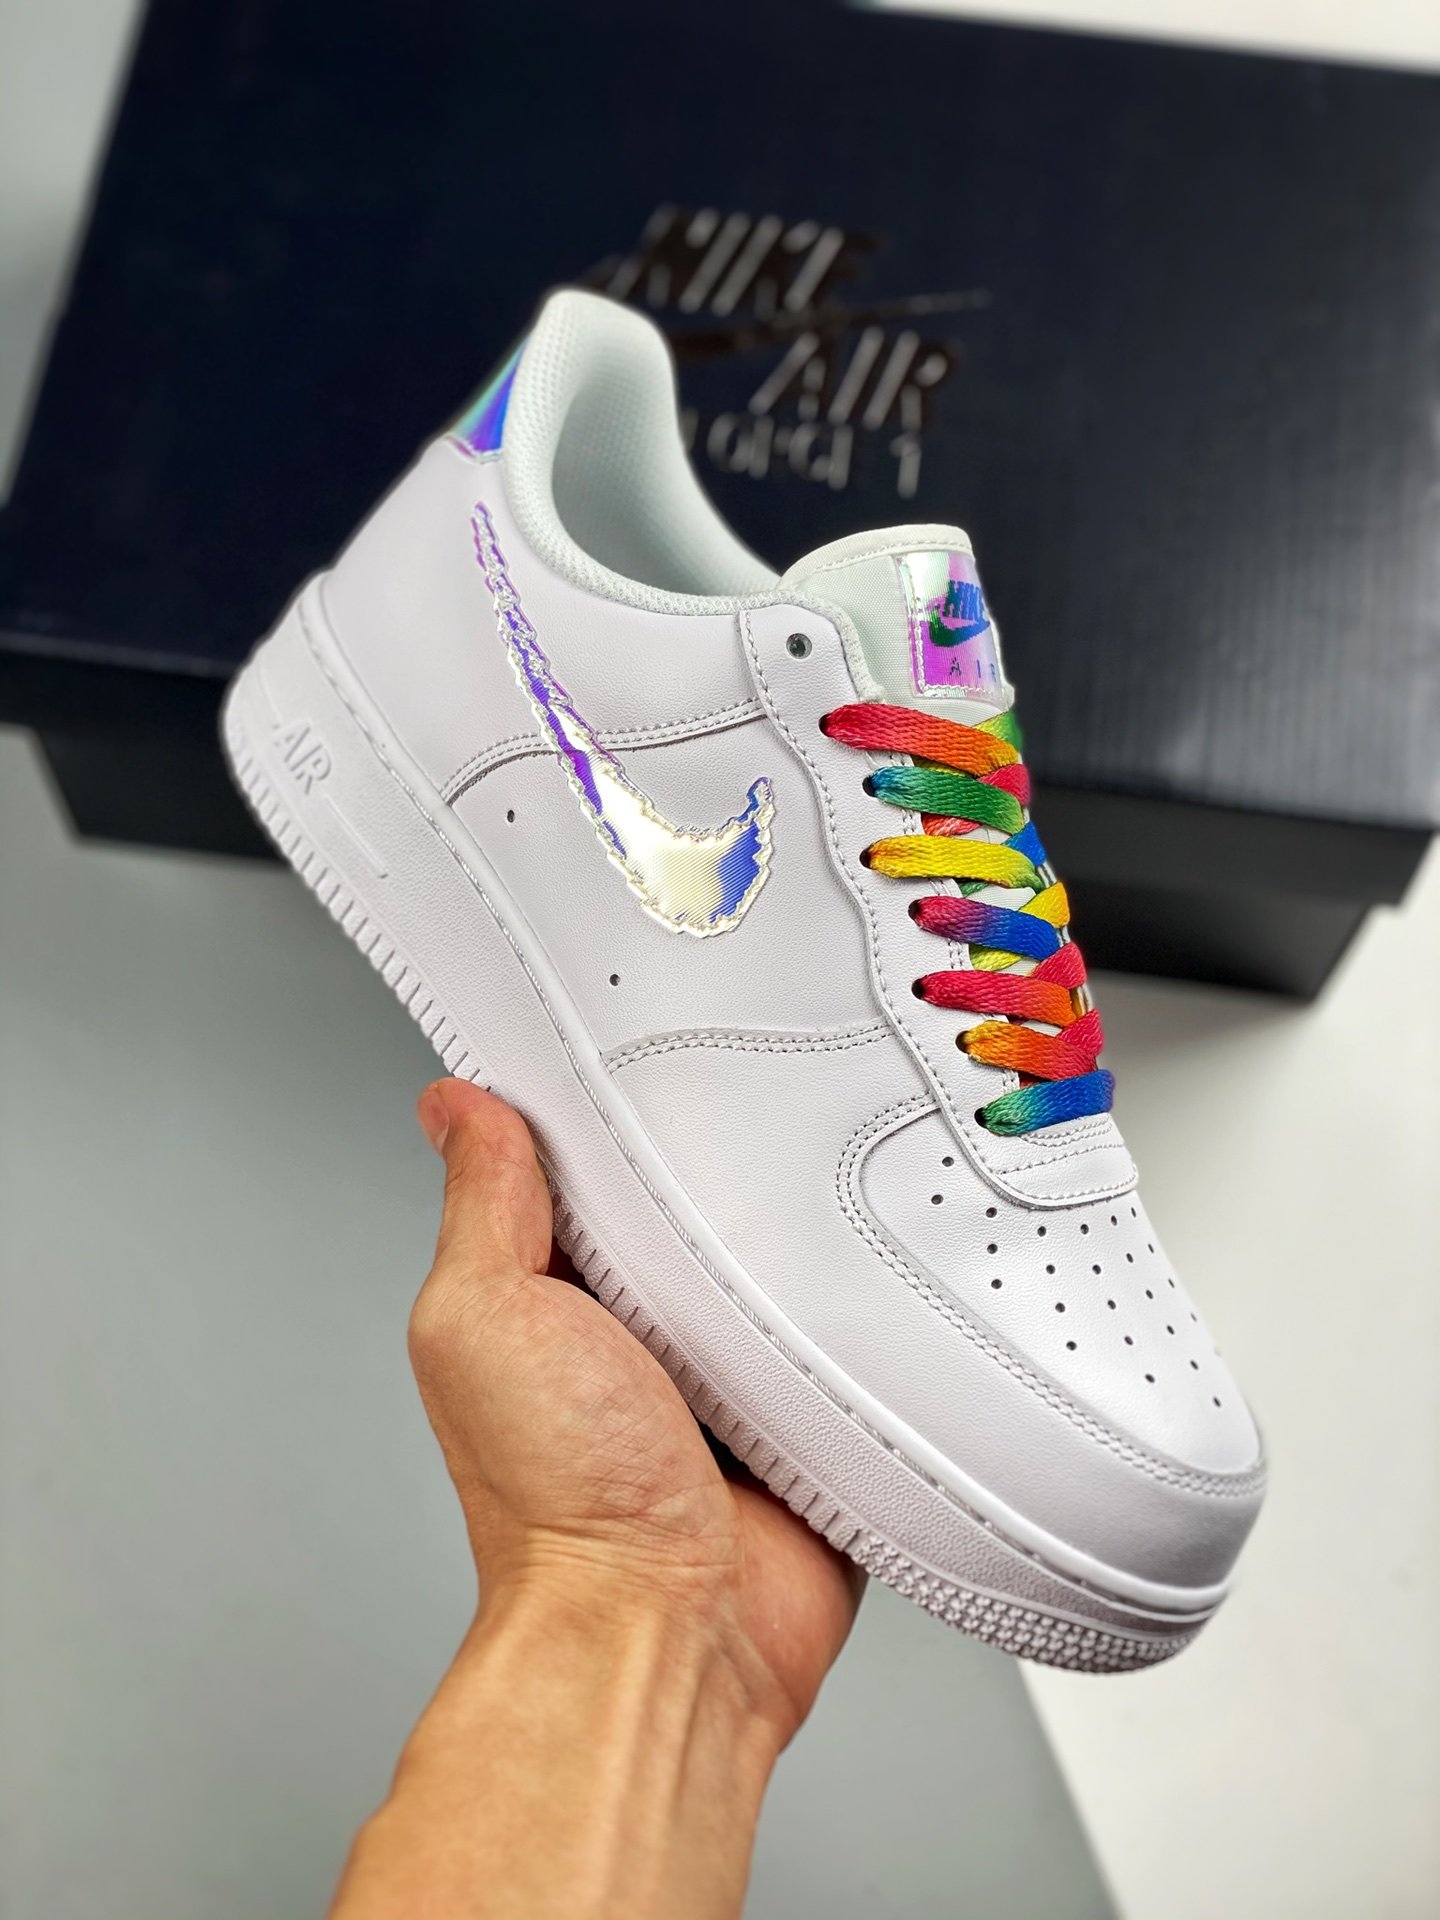 Nike Air AF Force 1 White Iridescent Pixel CV1699-100 Shoes